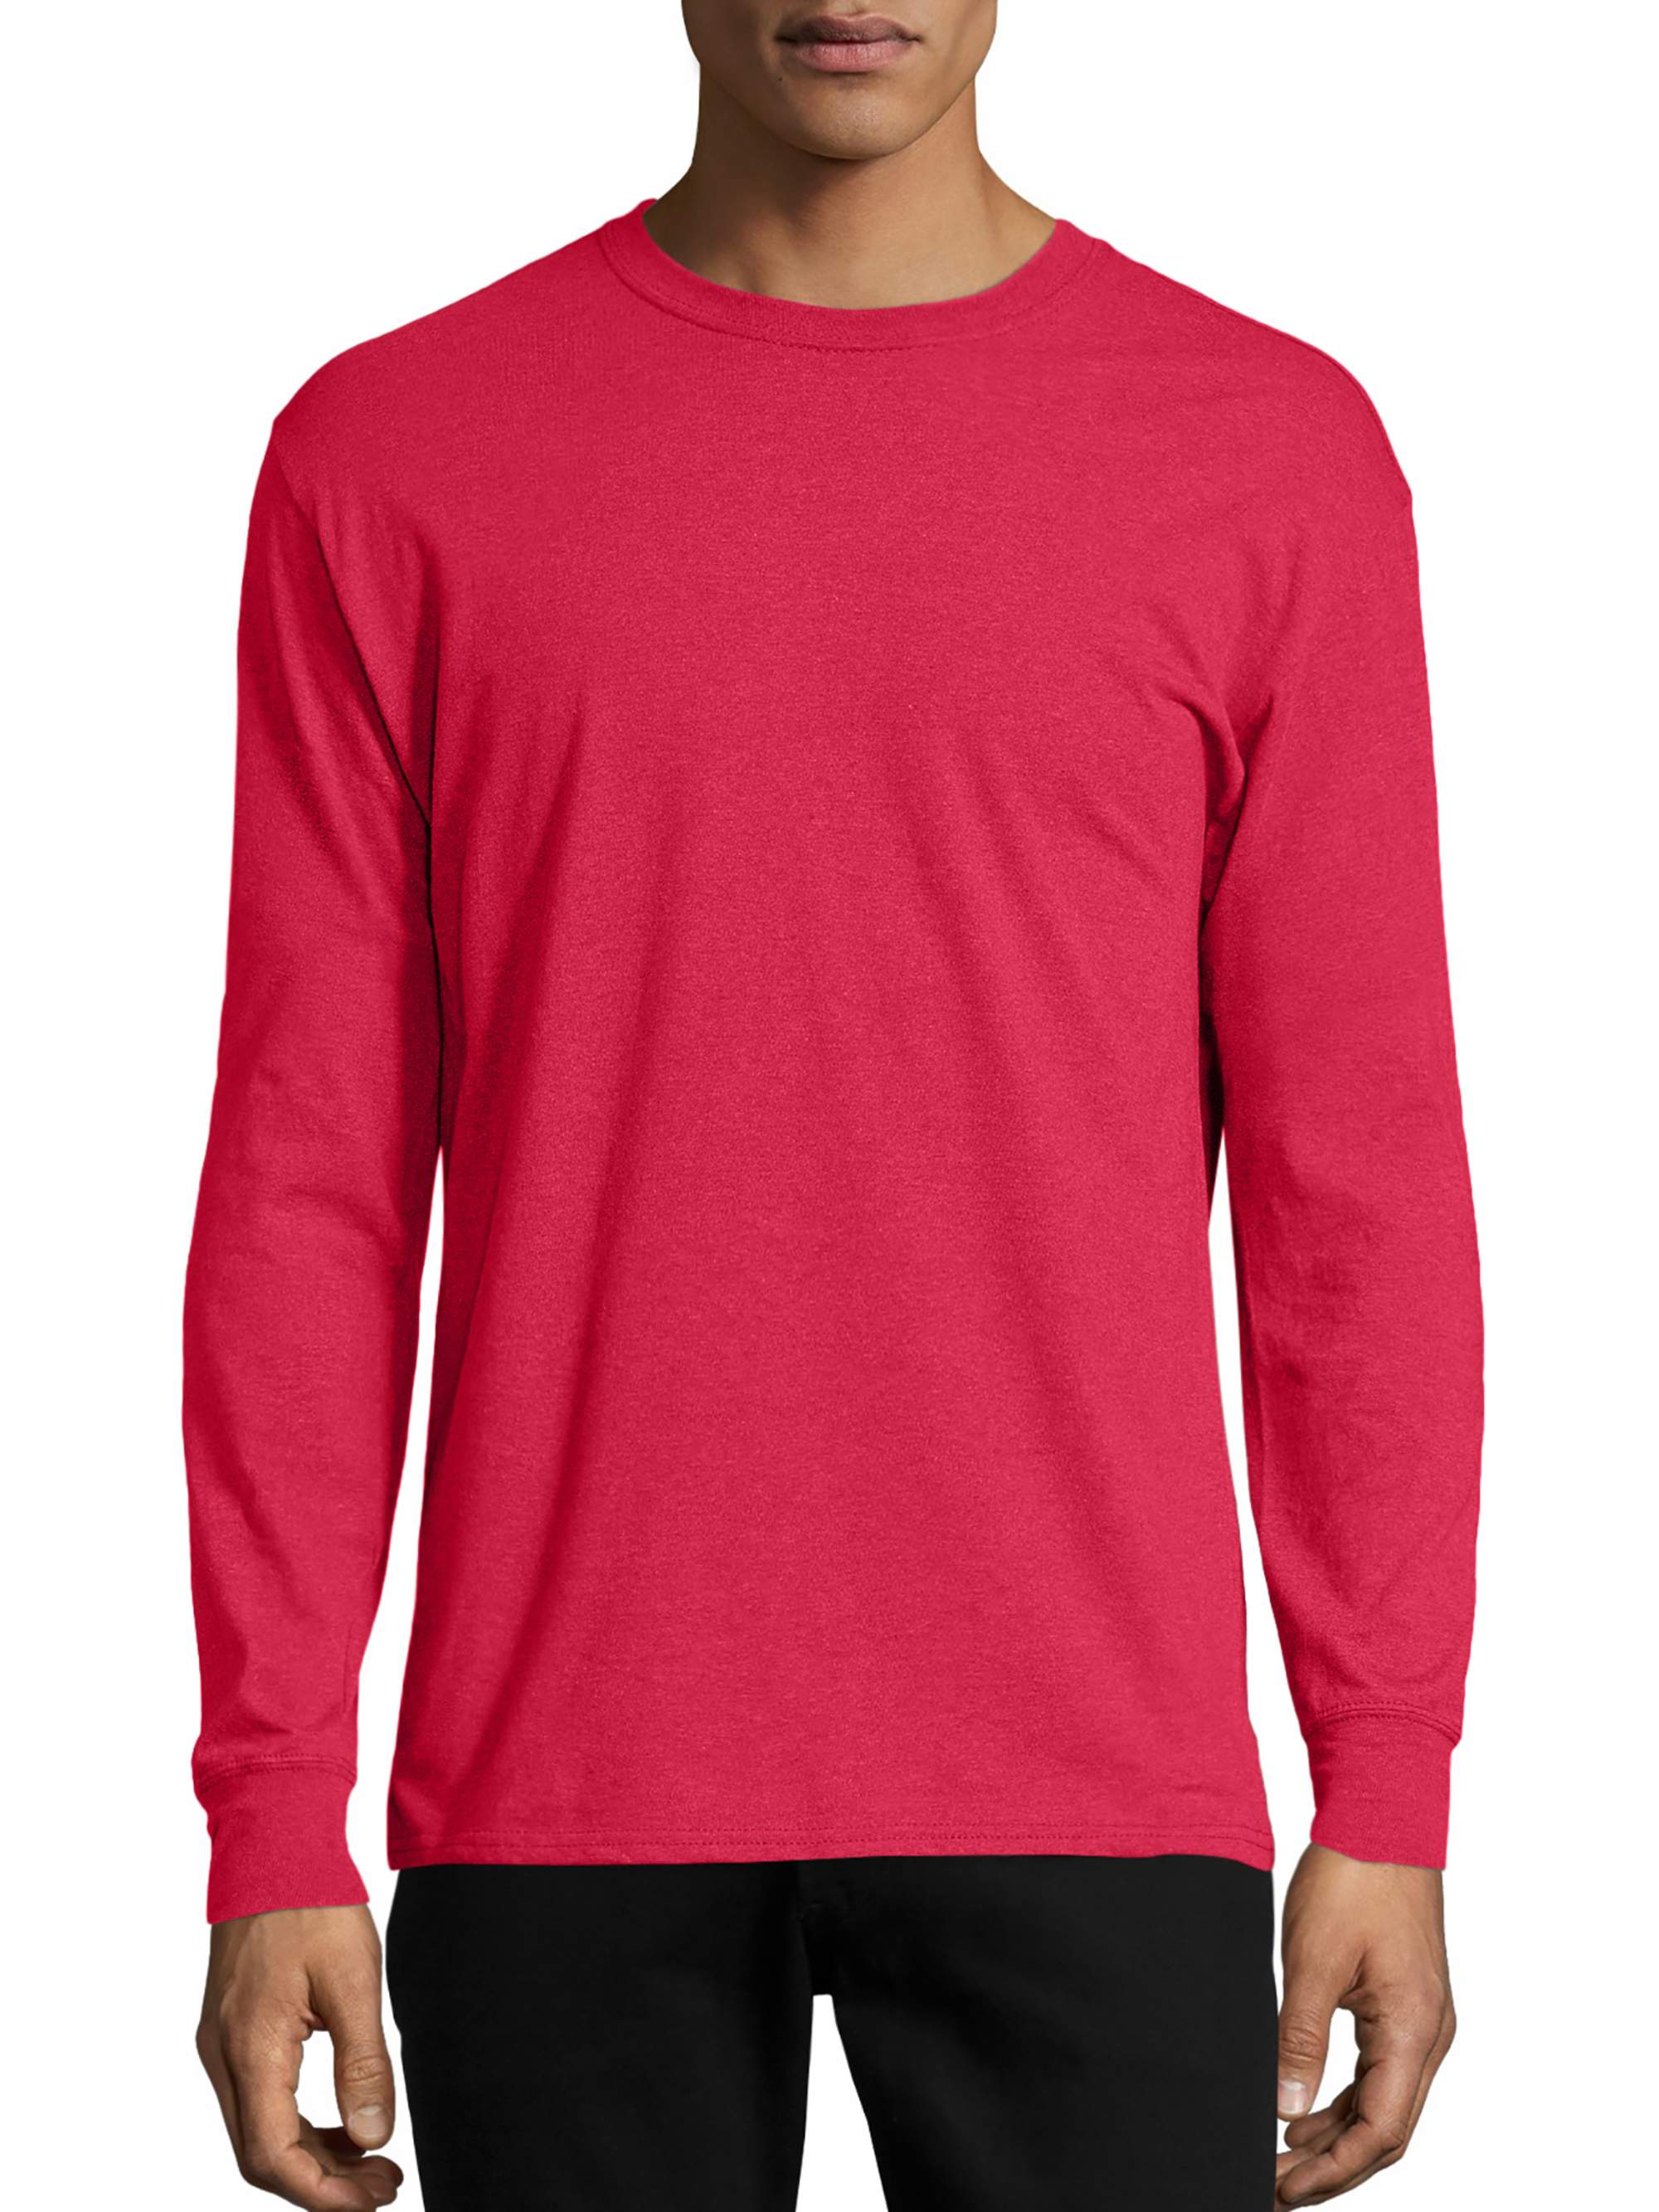 Hanes Men's and Big Men's X-Temp Lightweight Long Sleeve T-Shirt, Up To Size 3XL - image 1 of 5